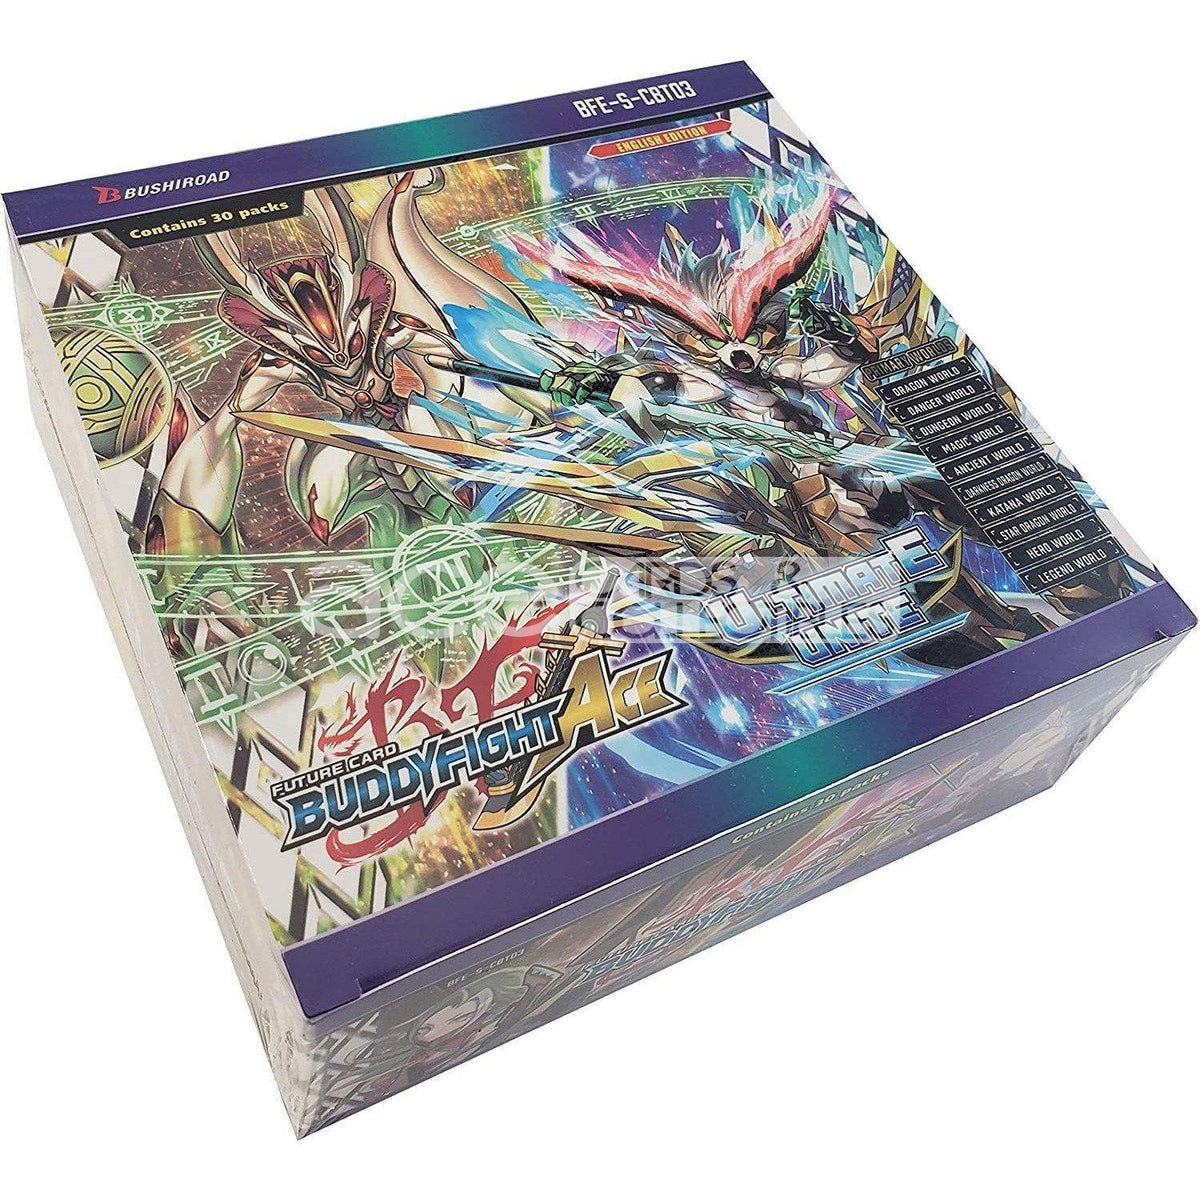 Future Card Buddyfight Ace Ultimate Unite [BFE-S-CBT03] (English)-Booster Box (30 packs)-Bushiroad-Ace Cards &amp; Collectibles